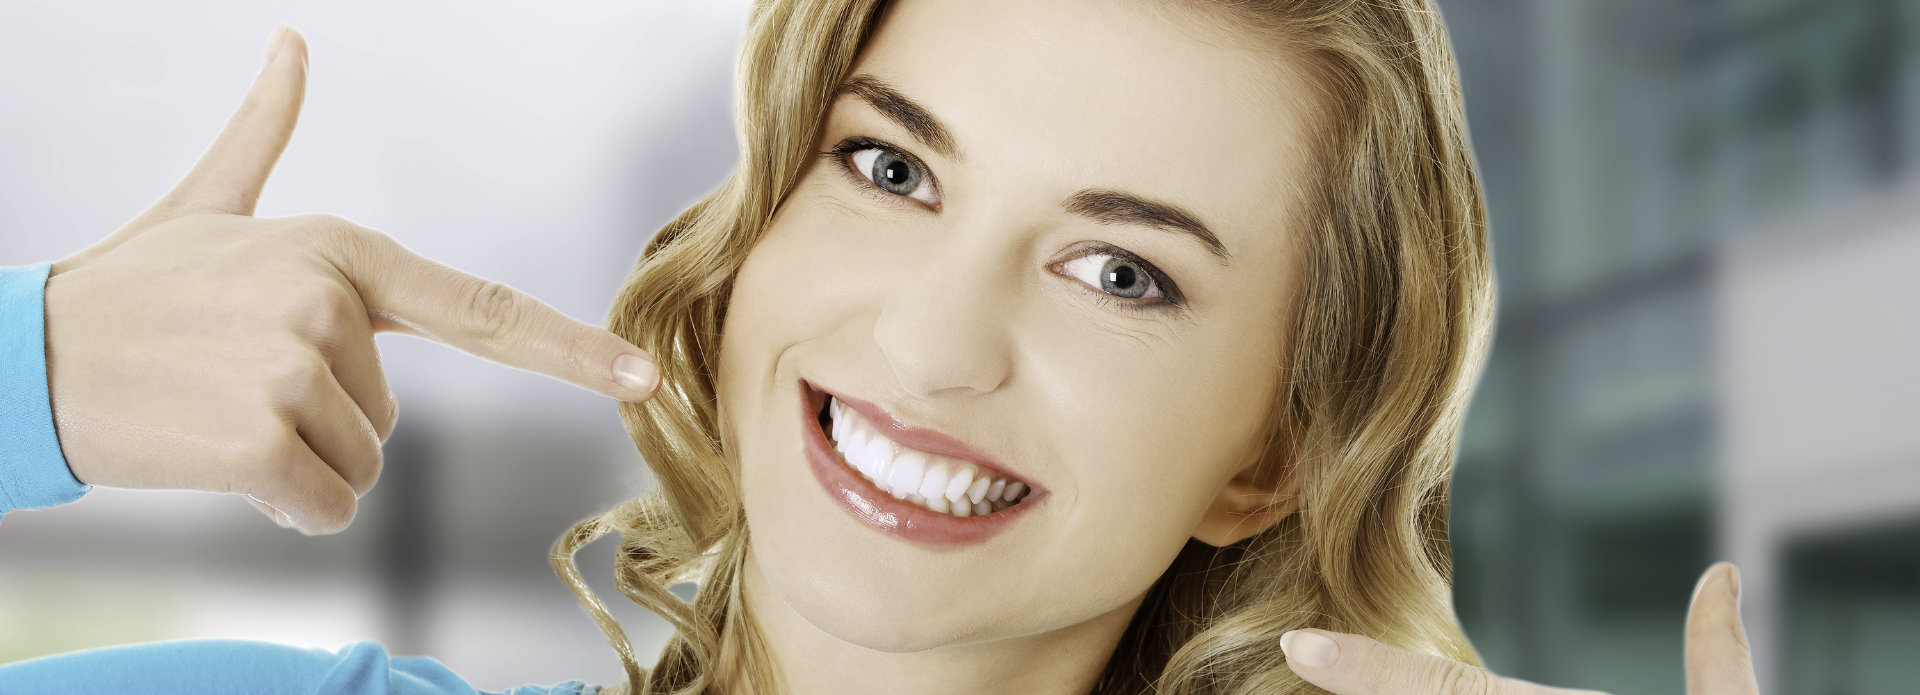 Happy young woman pointing at her whitened teeth.